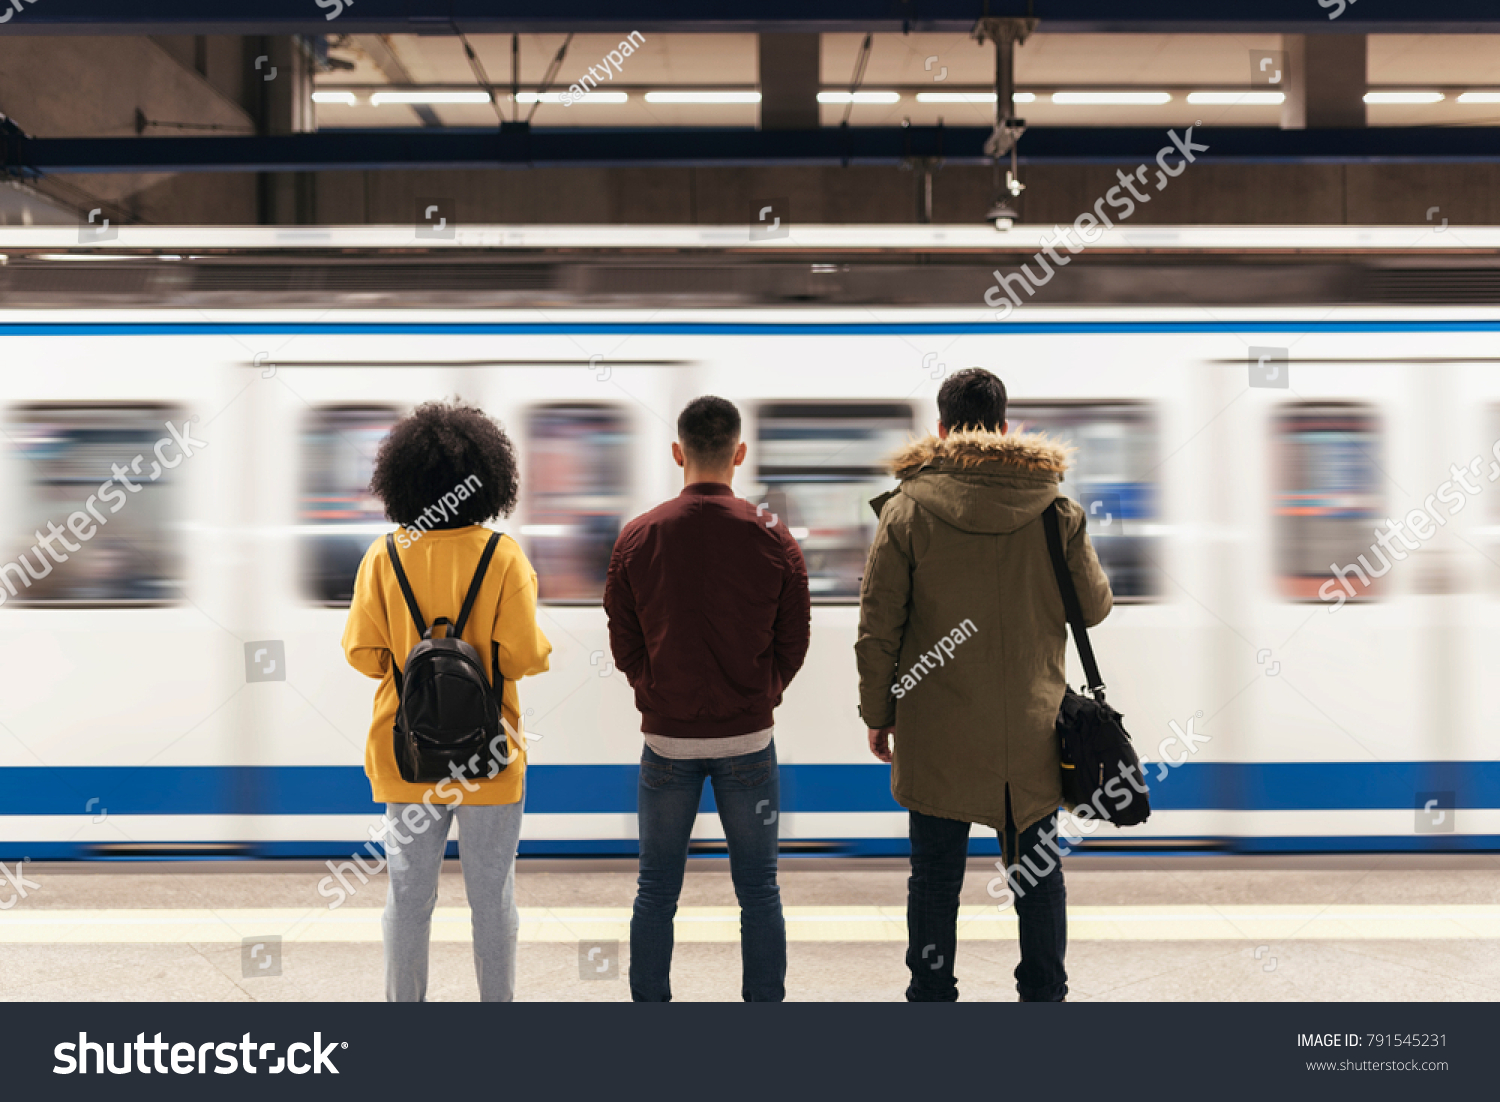 Group of friends waiting the train in the platform of subway station. Public transport concept. #791545231